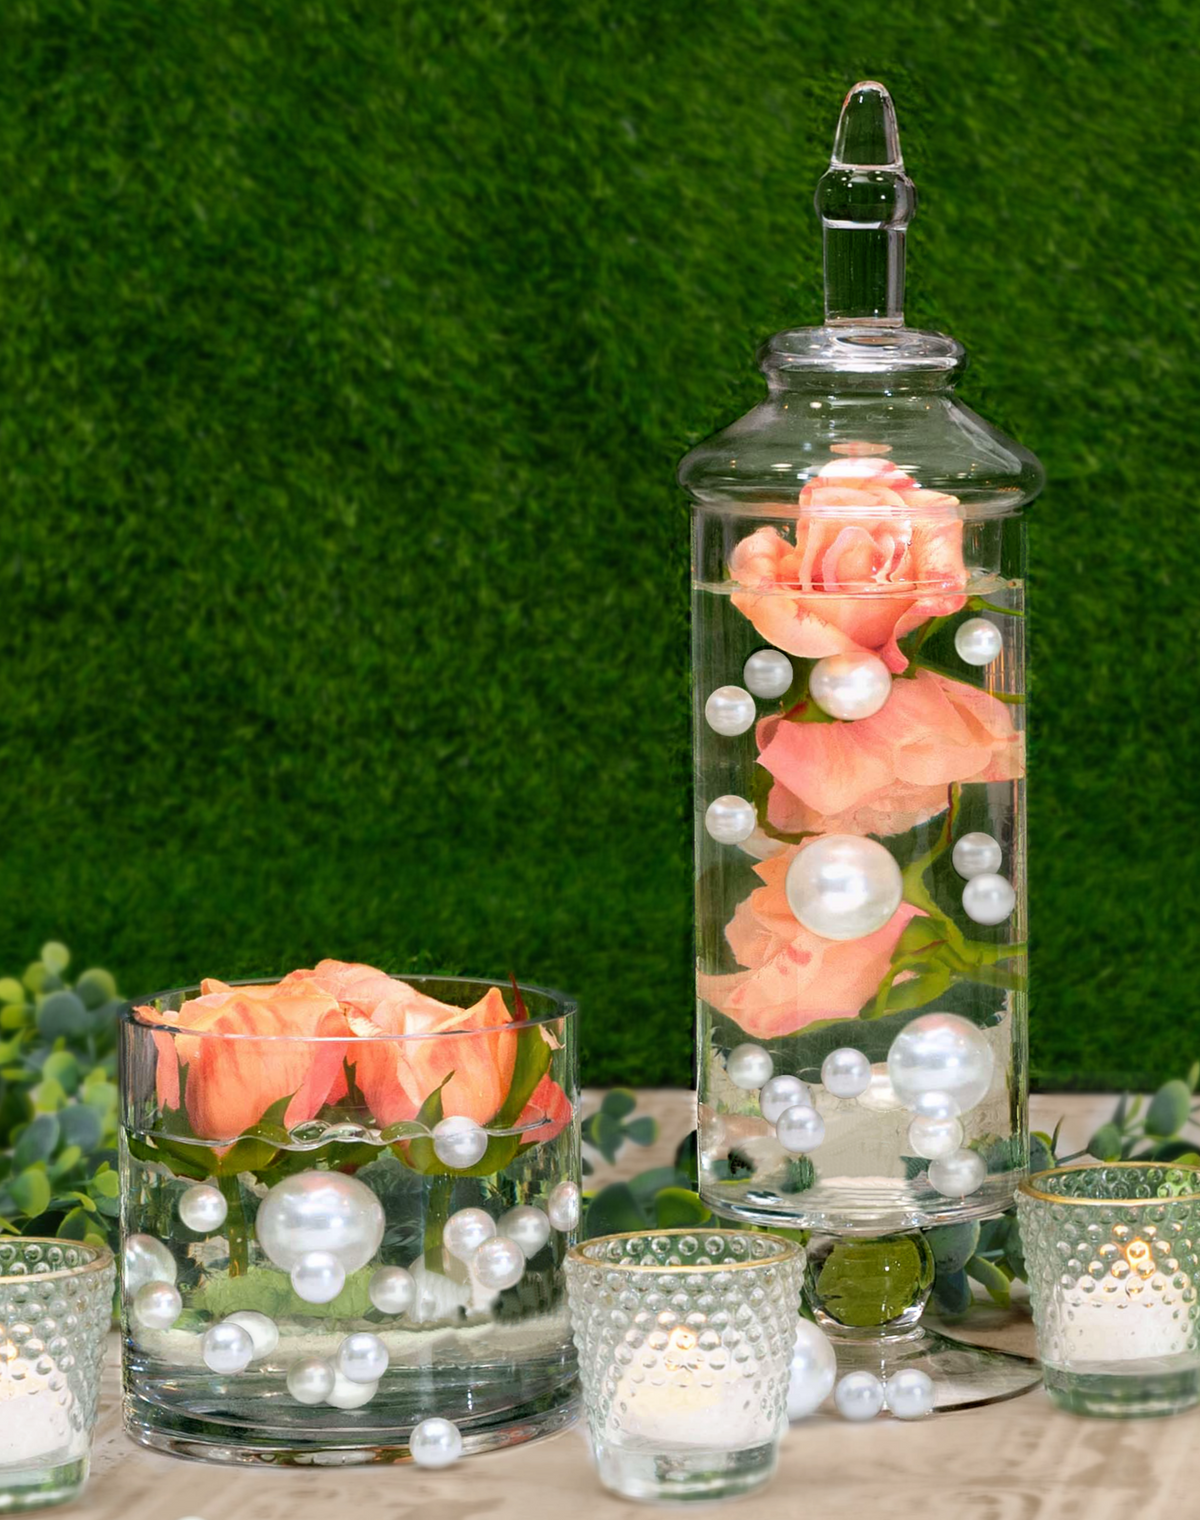 Floating Silk Peach Roses-Each Pk Fills 1 GL of Floating Roses for Your Vases-With Measured Transparent Gels Kits-Vase Decorations